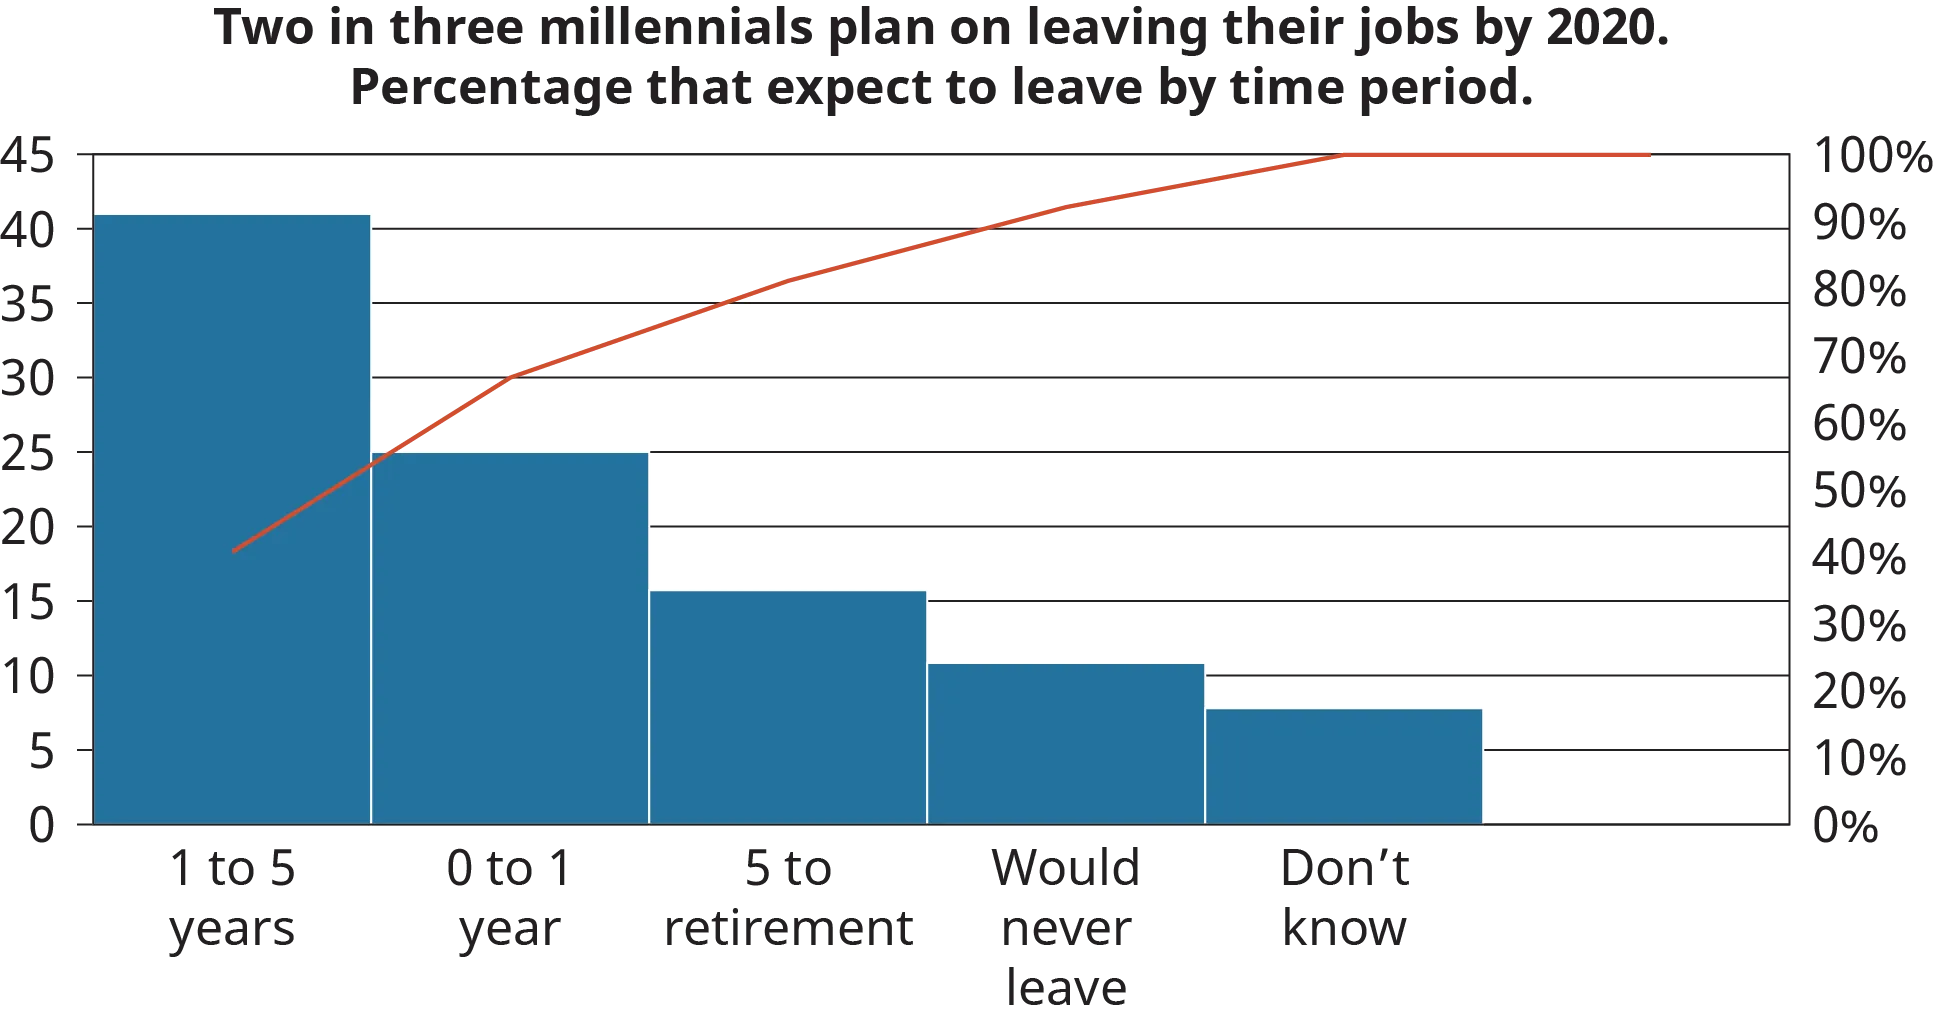 A dual-axis, vertical bar graph plots the percentage of employees who expect to leave their jobs by a particular time period.